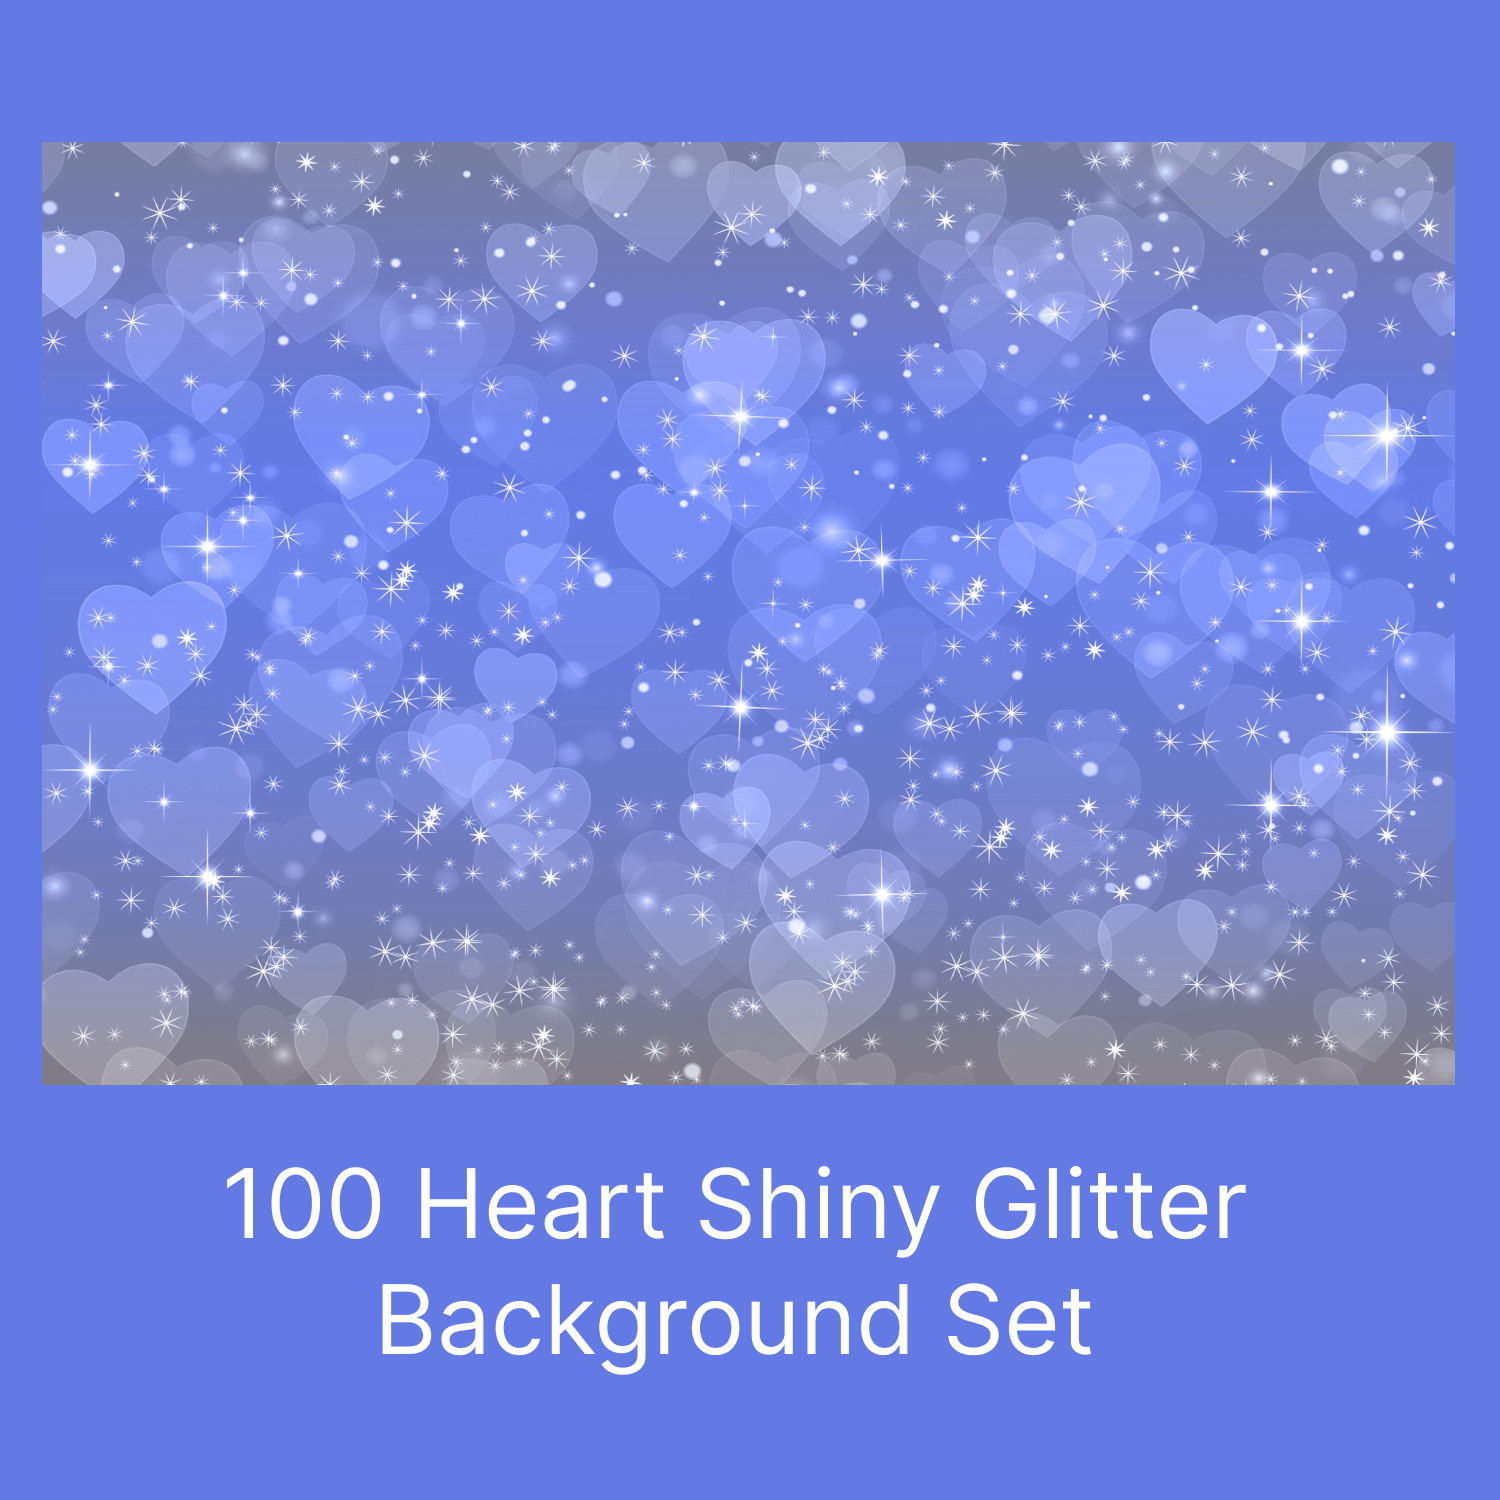 Blue background with hearts and stars.